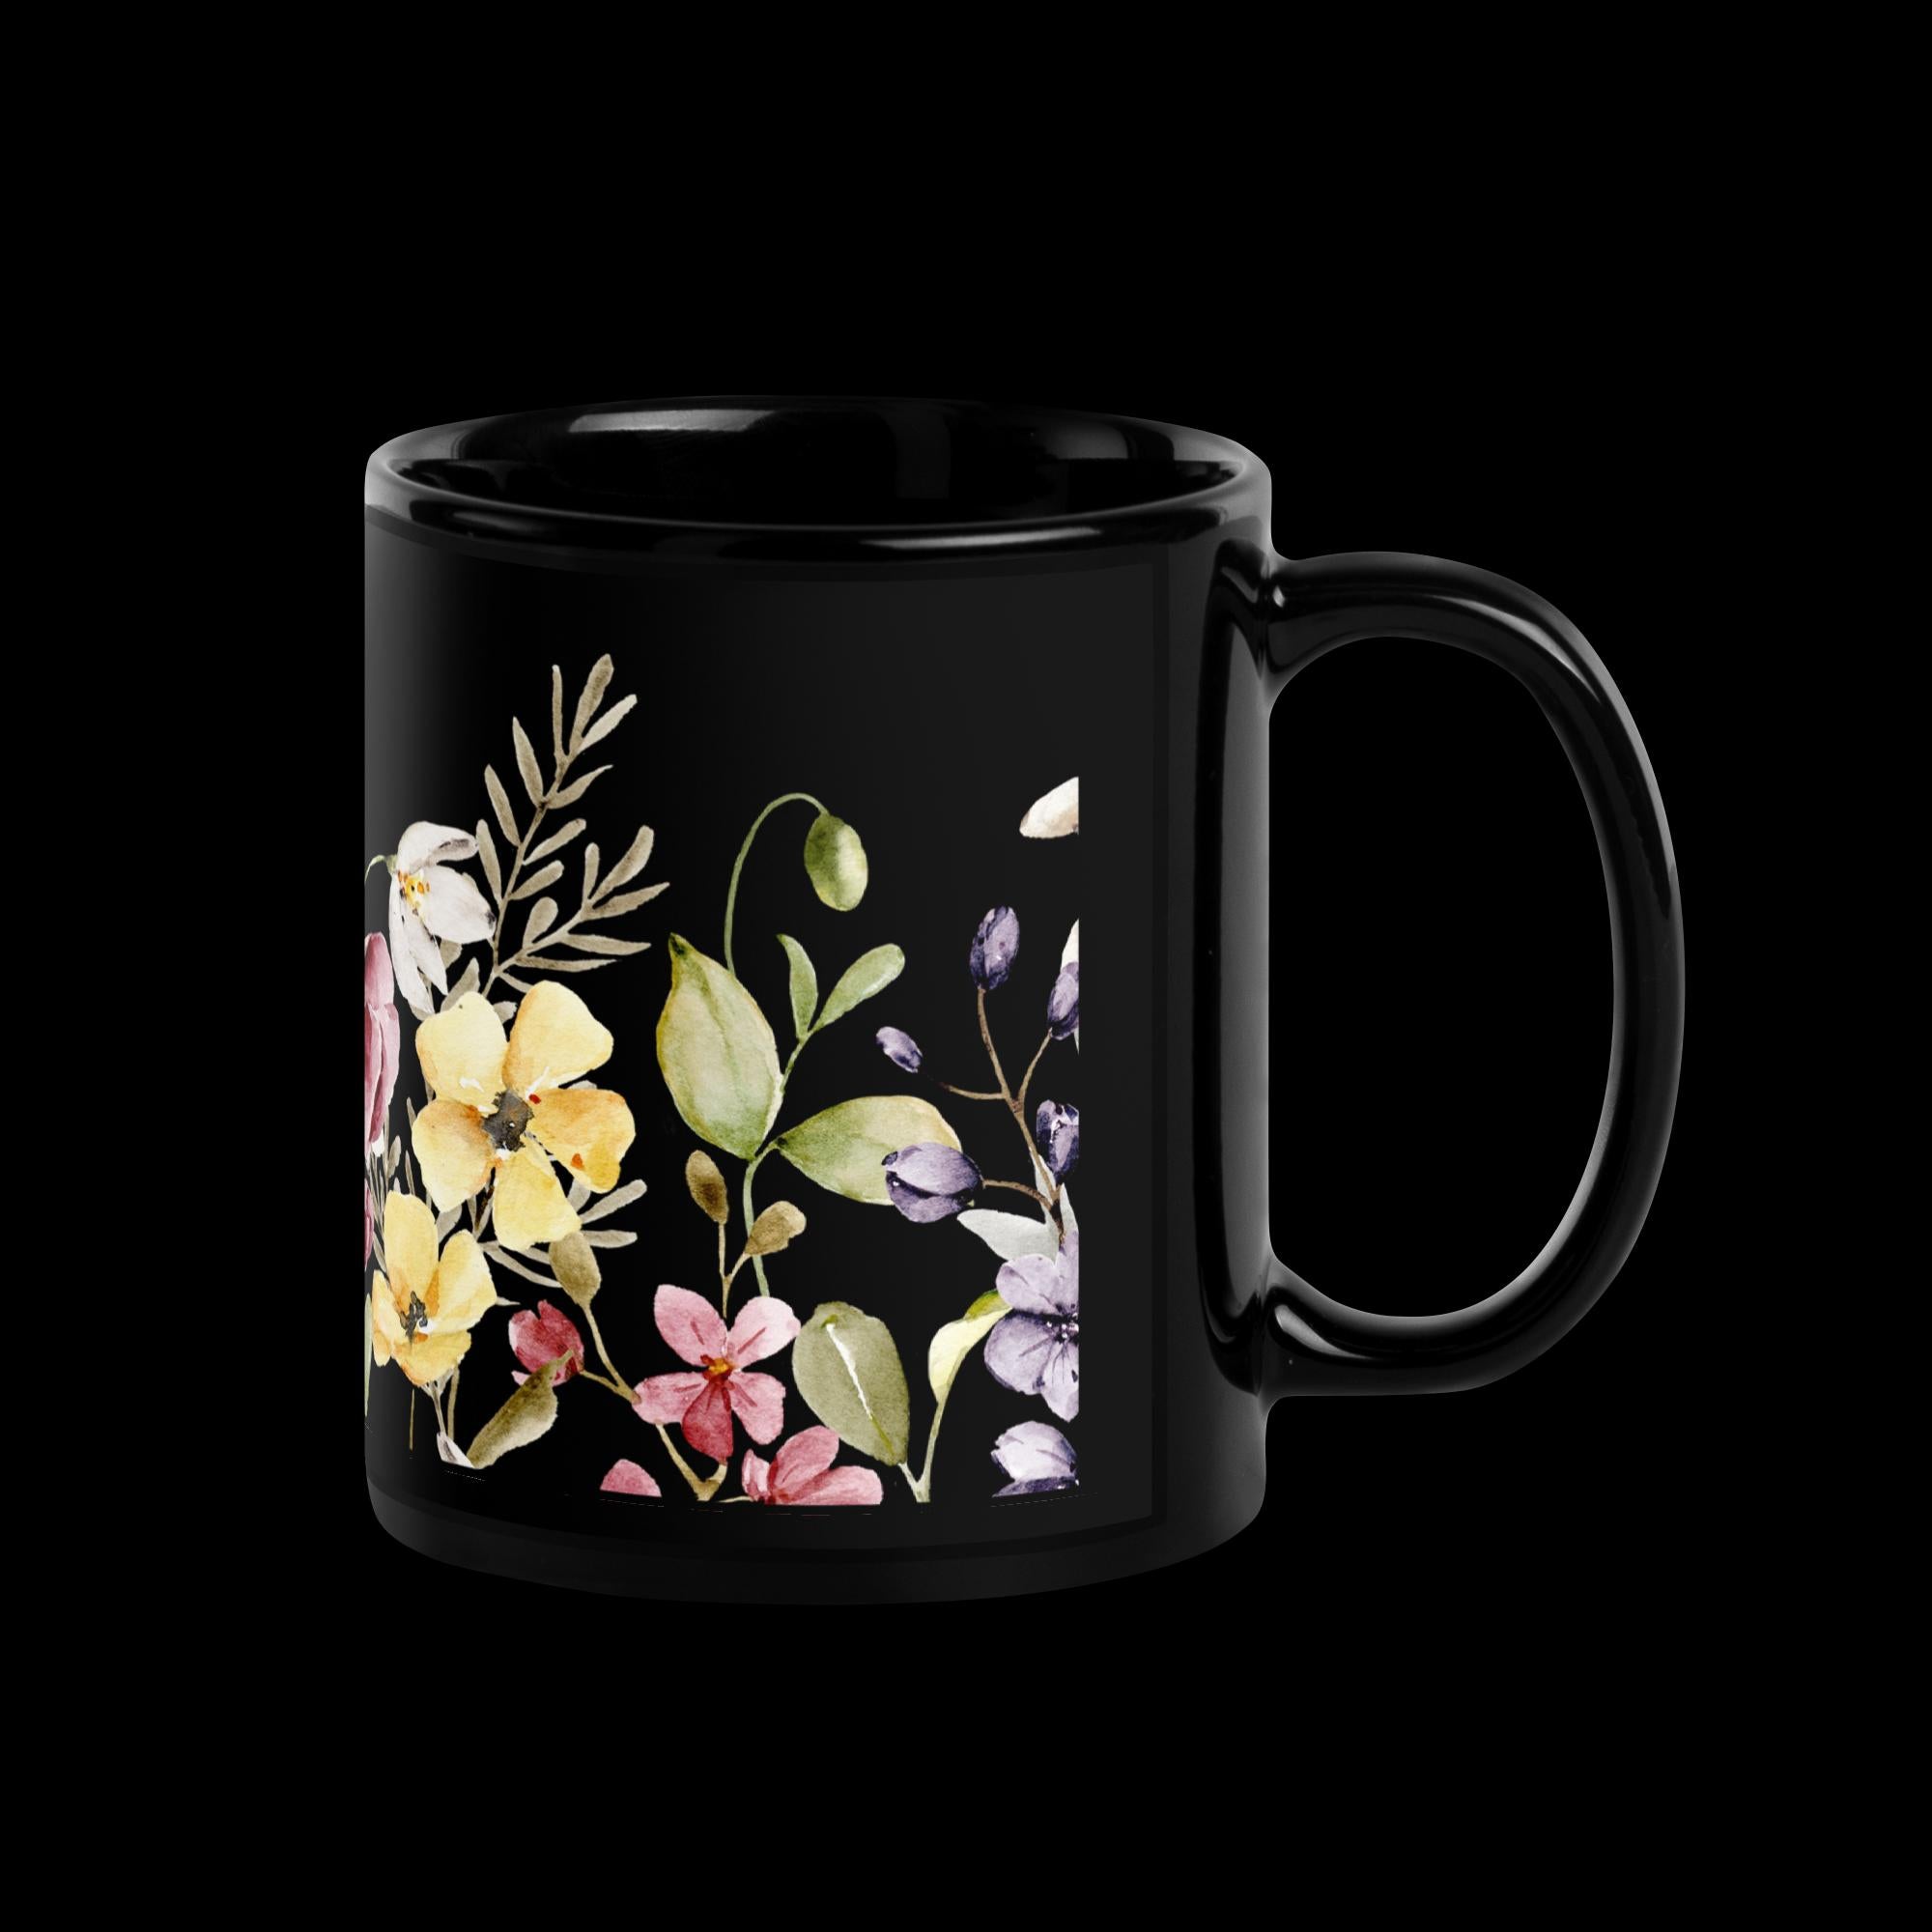 Coffee Cup, Black Glossy Mug, Tea Cup, Gift for dad, gift for mom, gift